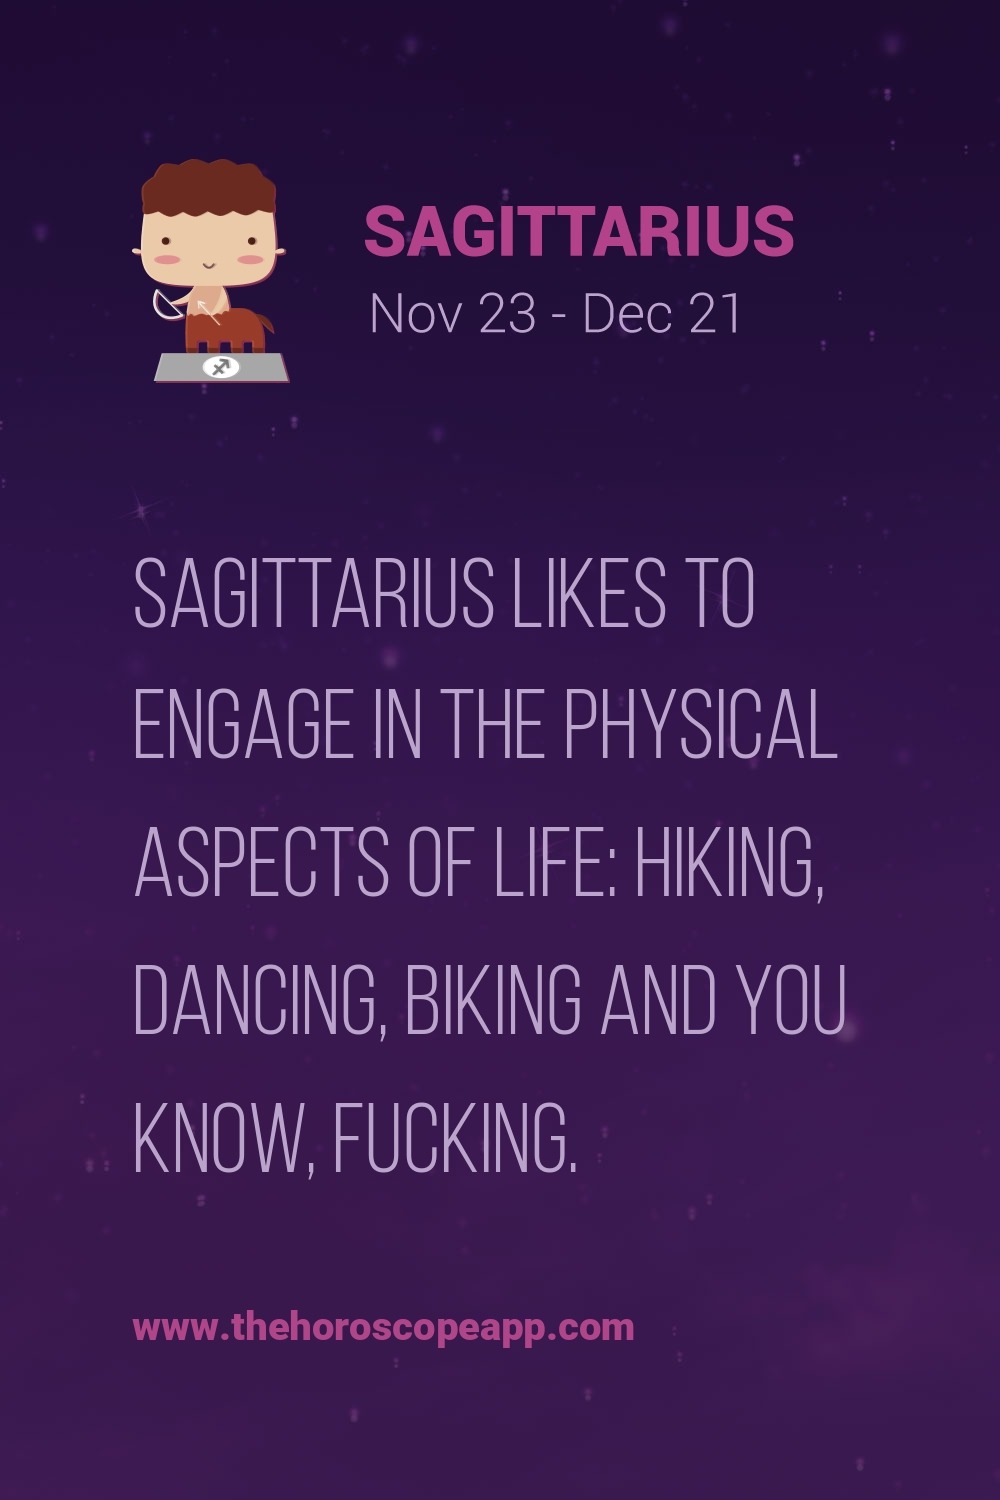 thehoroscopeapp: The Horoscope AppSagittarius likes to engage in the physical aspects of life: hikin